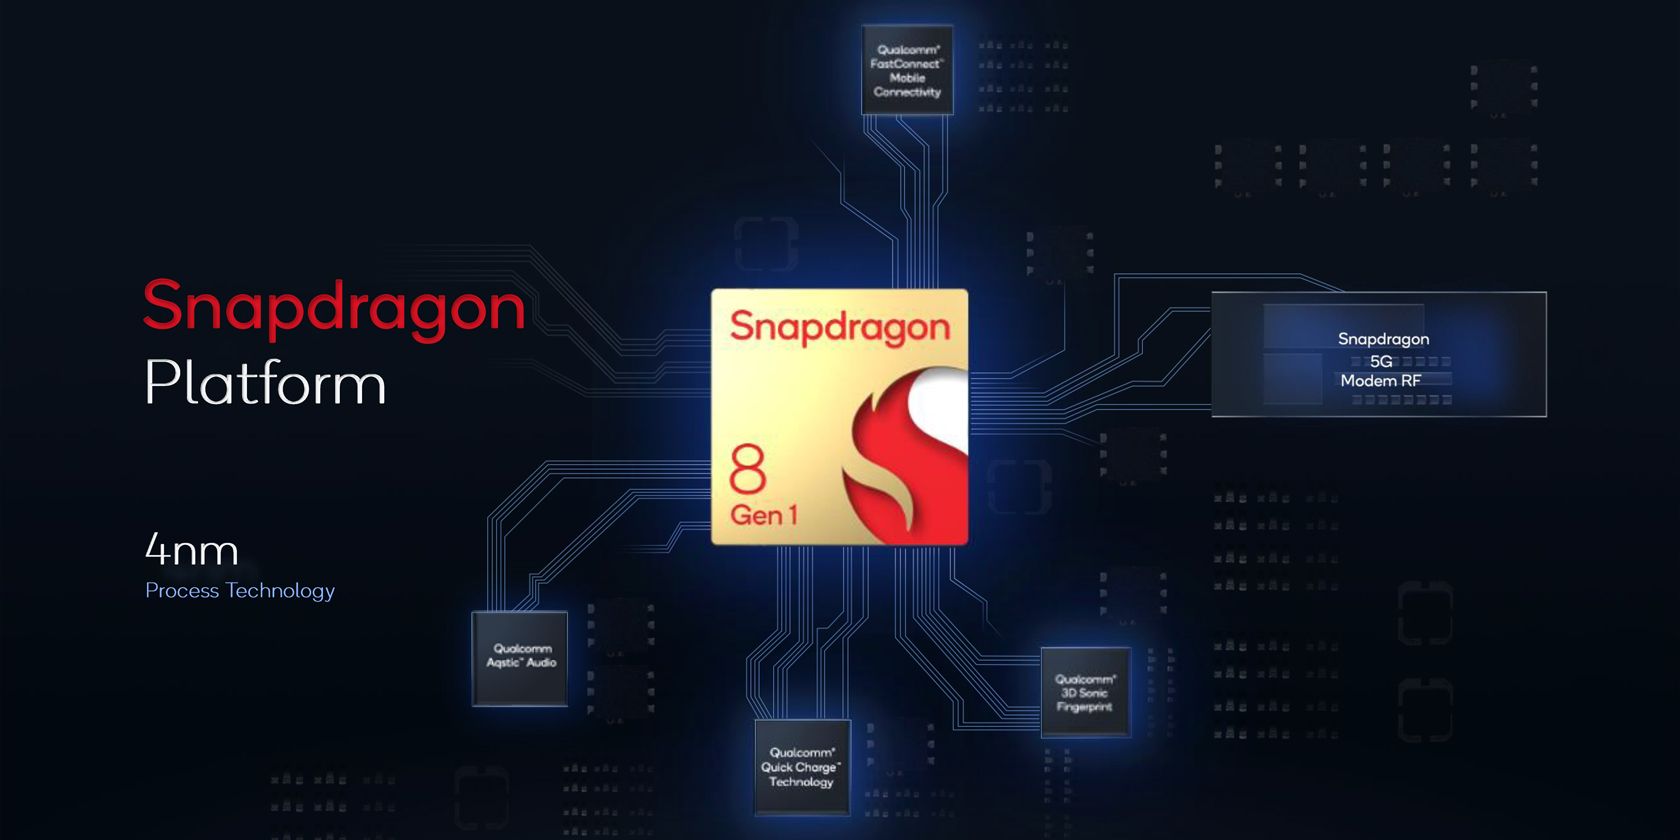 Snapdragon 8 Gen 1 chip on 4nm process technology